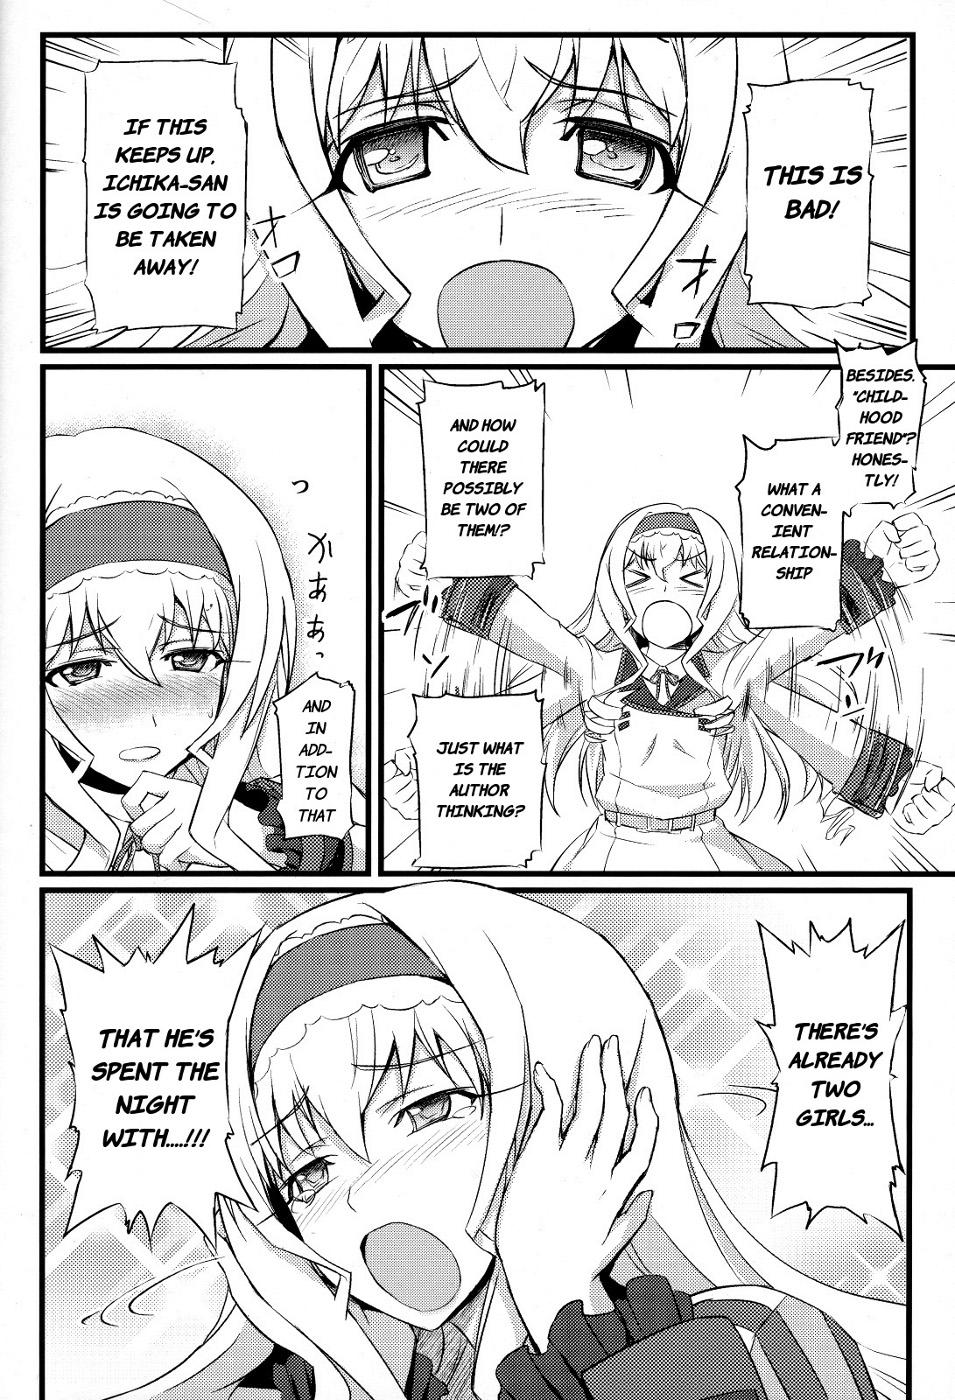 Pussy To Mouth Cecilia no Yuuutsu | The Melancholy of Cecilia - Infinite stratos Gay Cock - Page 3